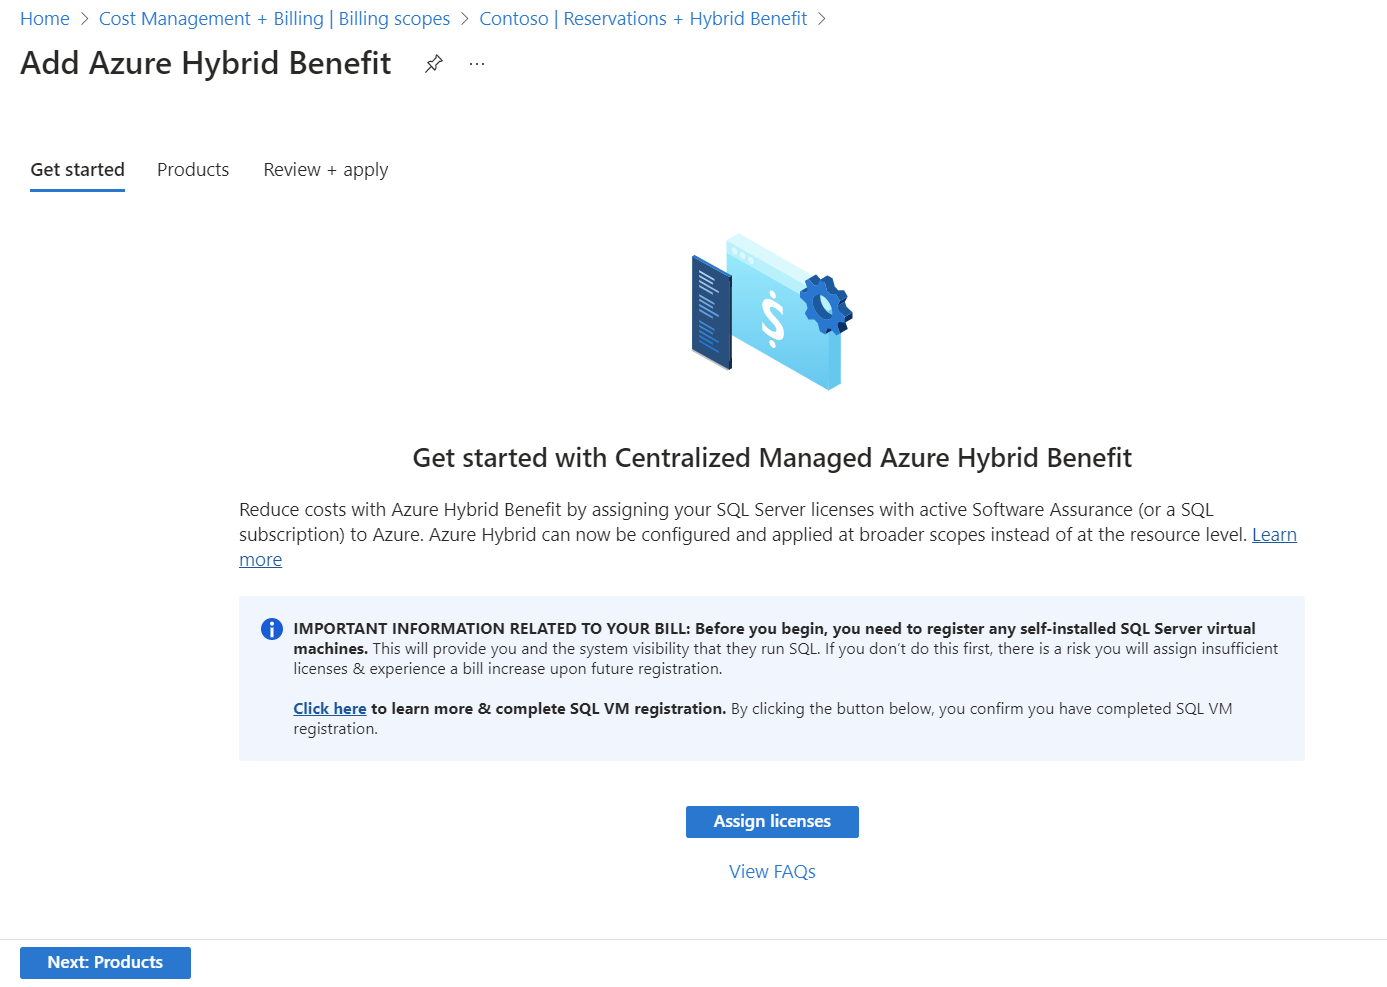 Screenshot showing Get started with Centrally Managed Azure Hybrid Benefit selection.